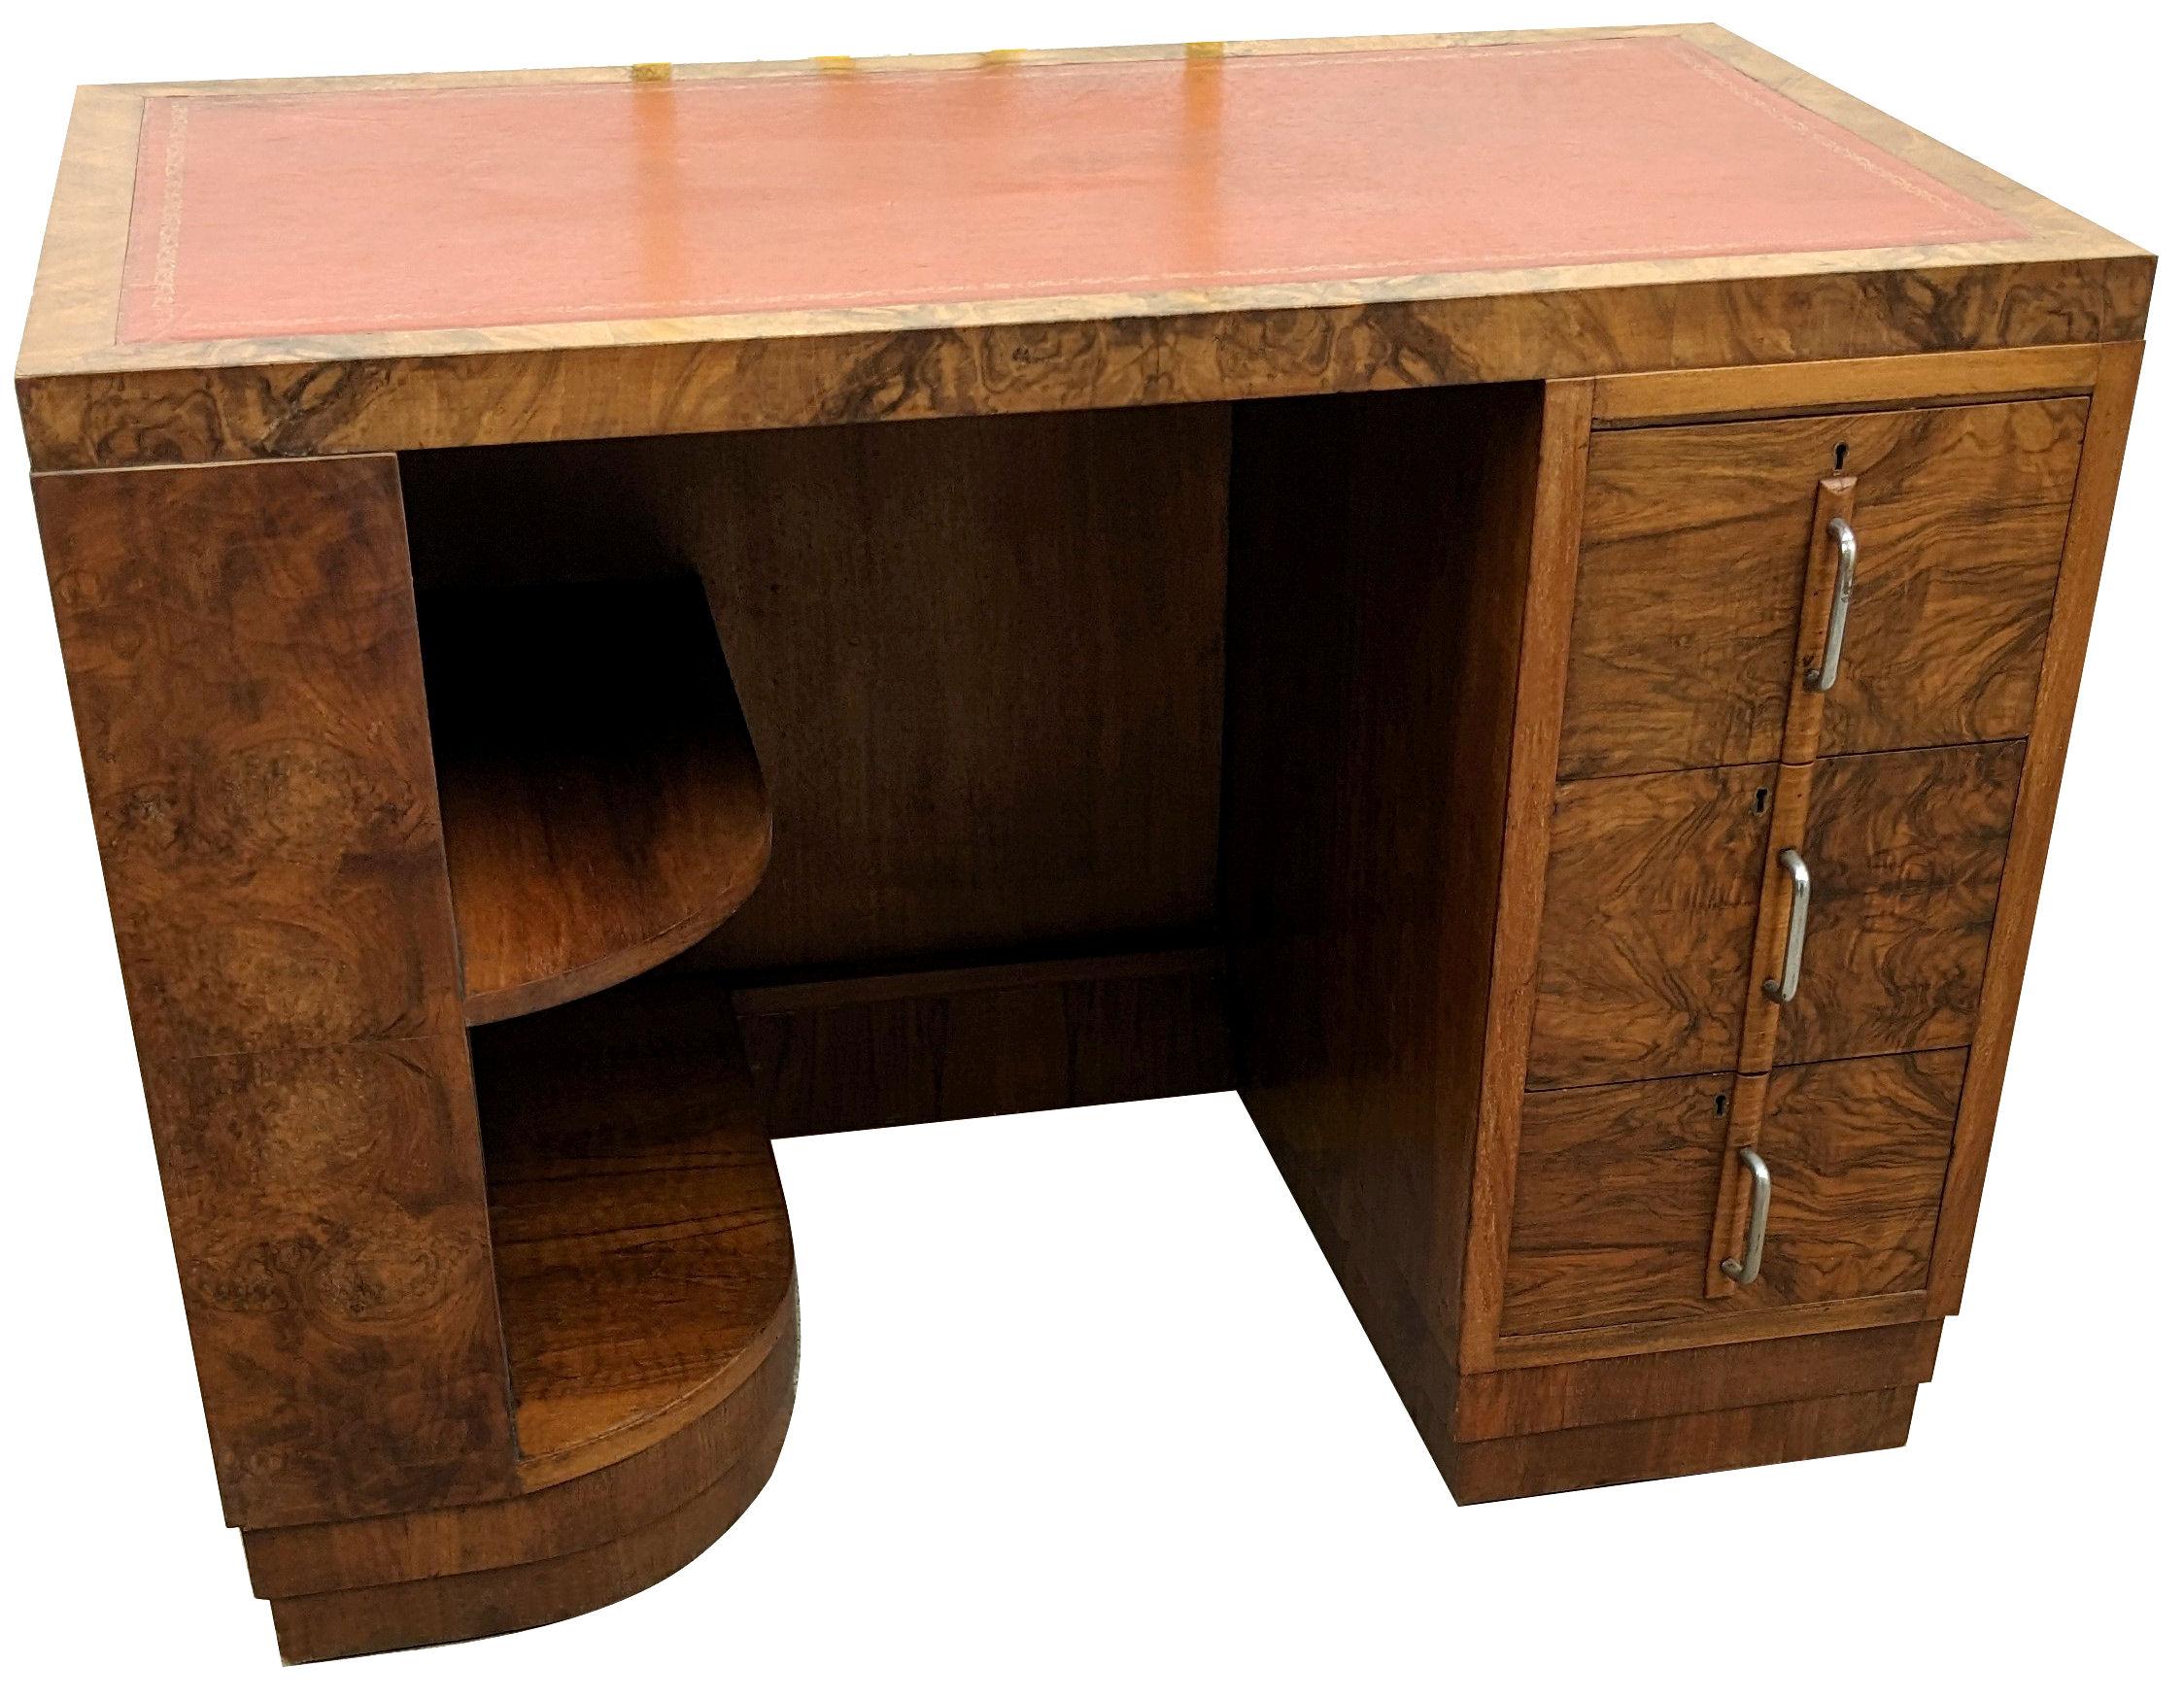 For your consideration is this exceptional Art Deco English walnut desk of good proportions and dating to the 1930's. A high level of craftsmanship and materials used is evident through out. Fabulous shape and styling will so easily integrate with